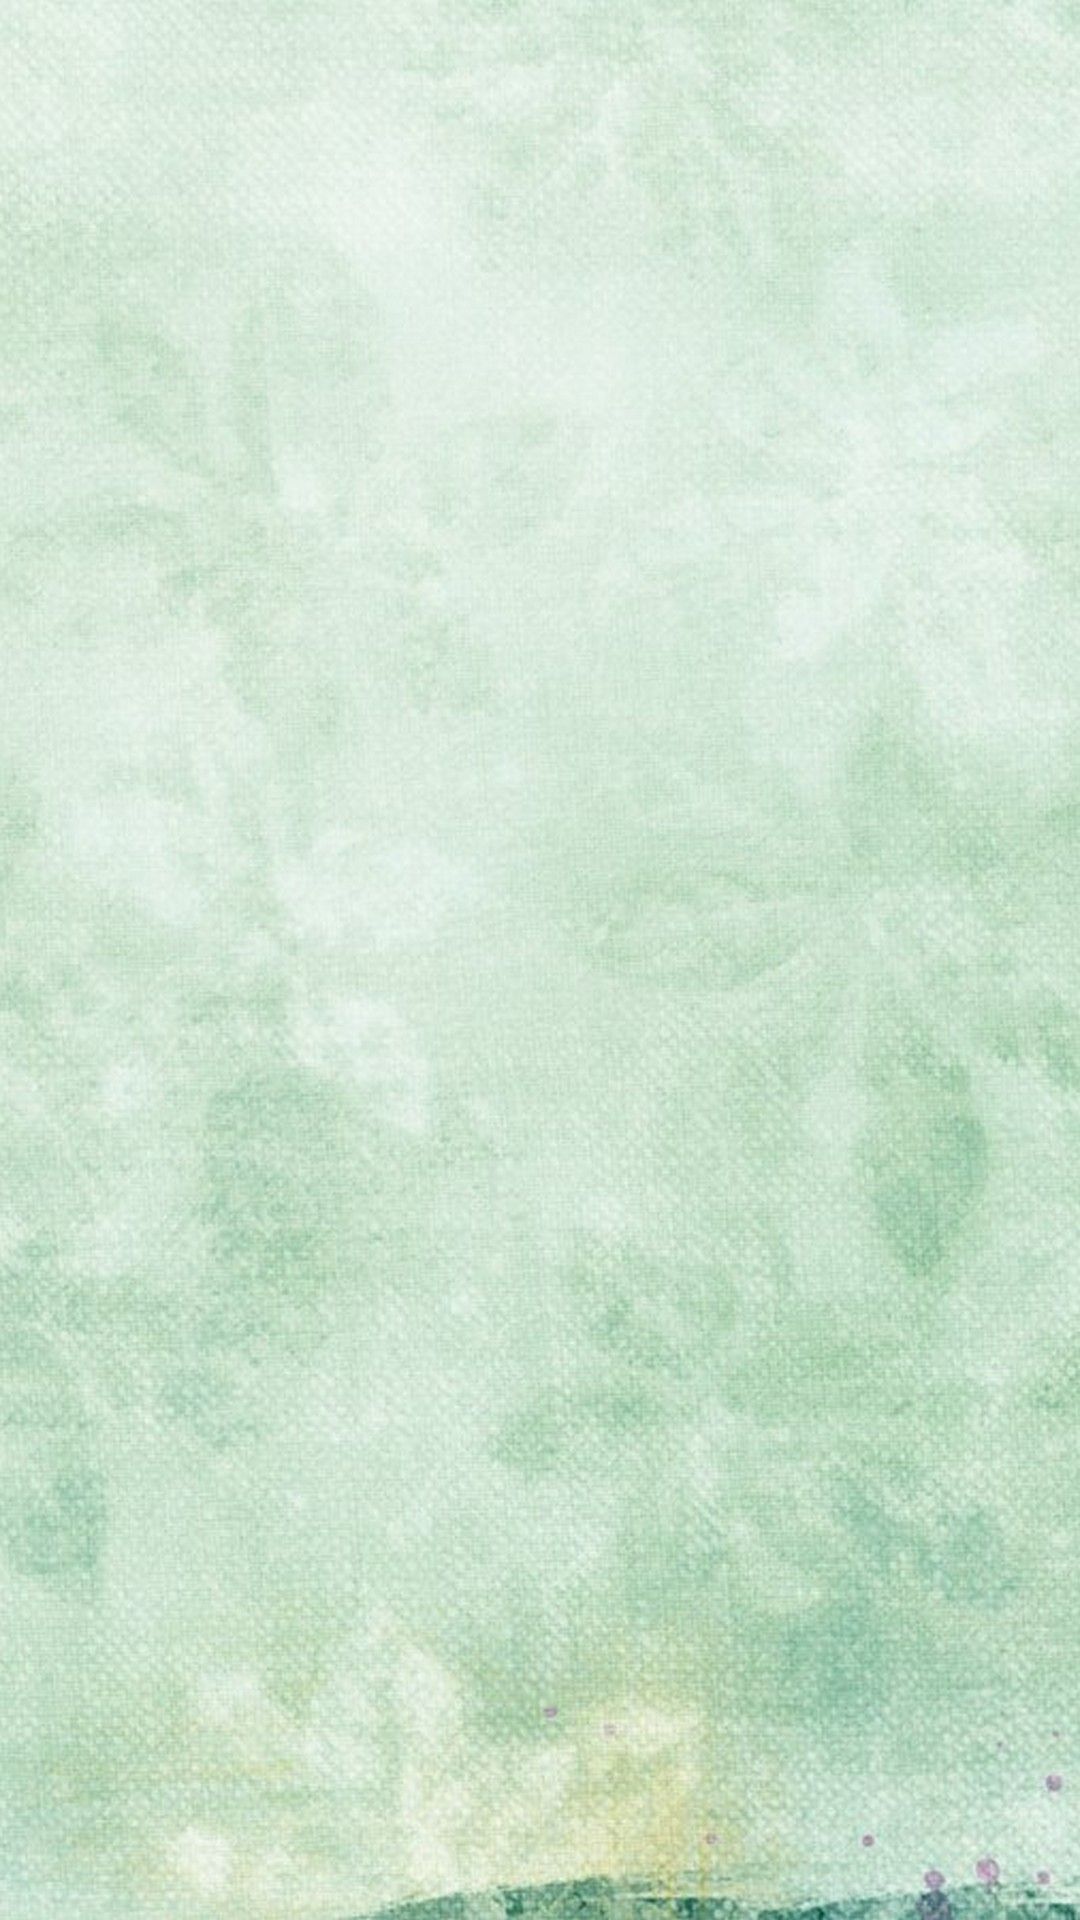 Mint and White Wallpaper Free Mint and White Background